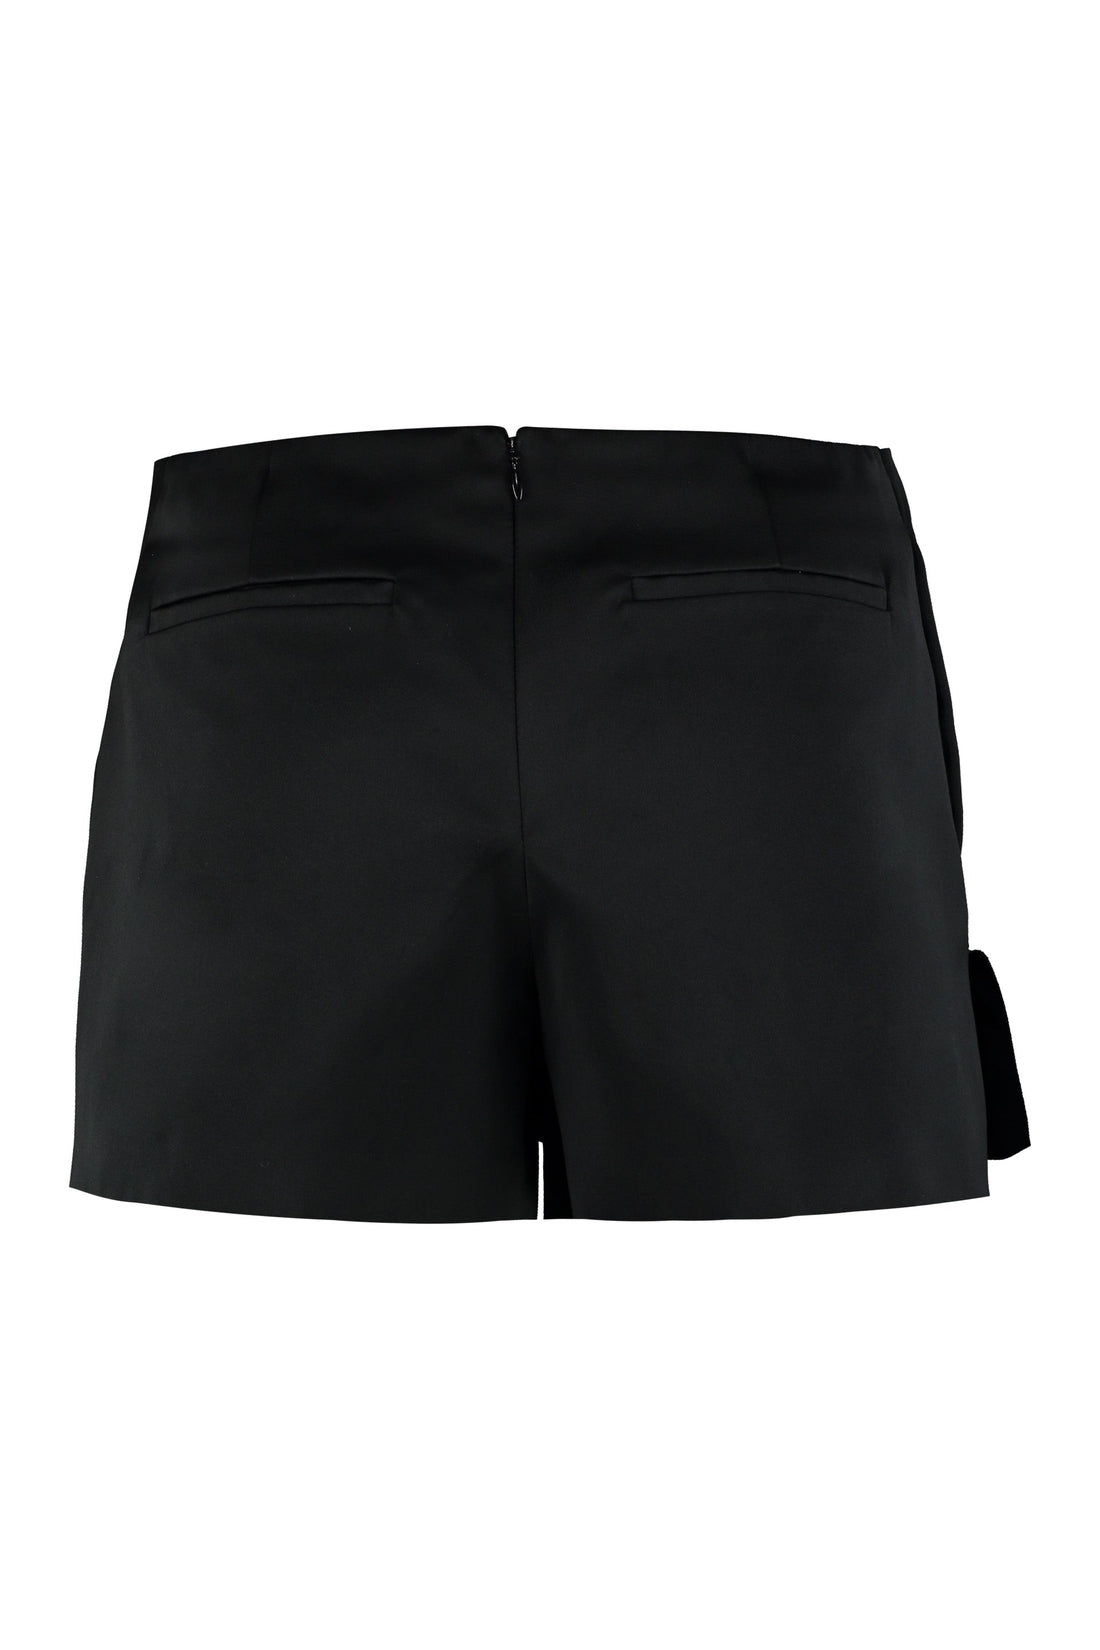 Red Valentino-OUTLET-SALE-Cady shorts-ARCHIVIST